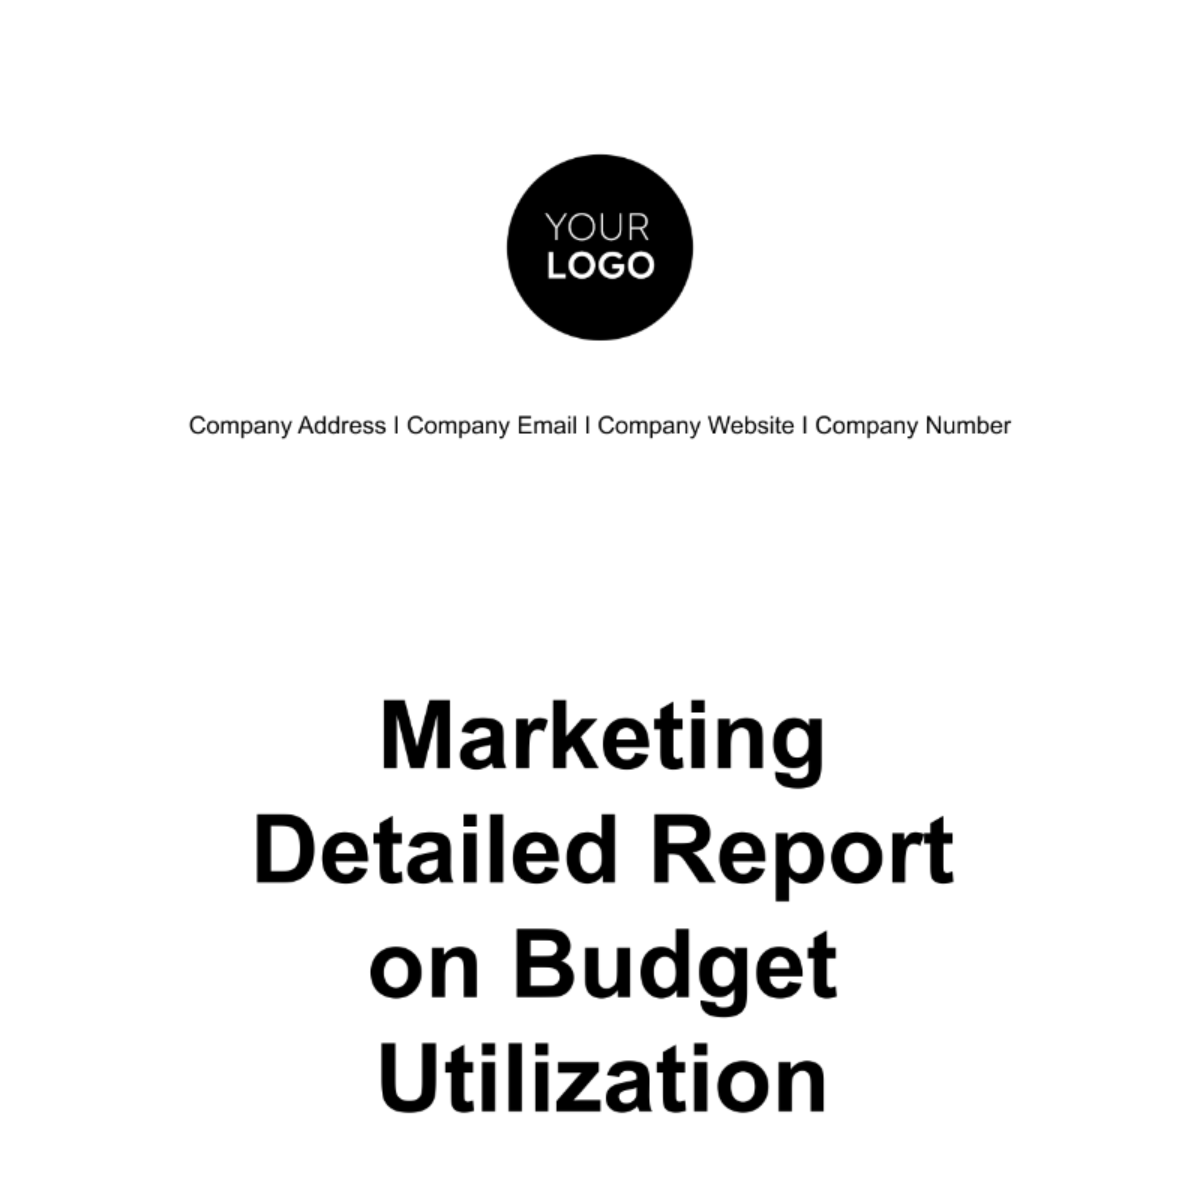 Free Marketing Detailed Report on Budget Utilization Template